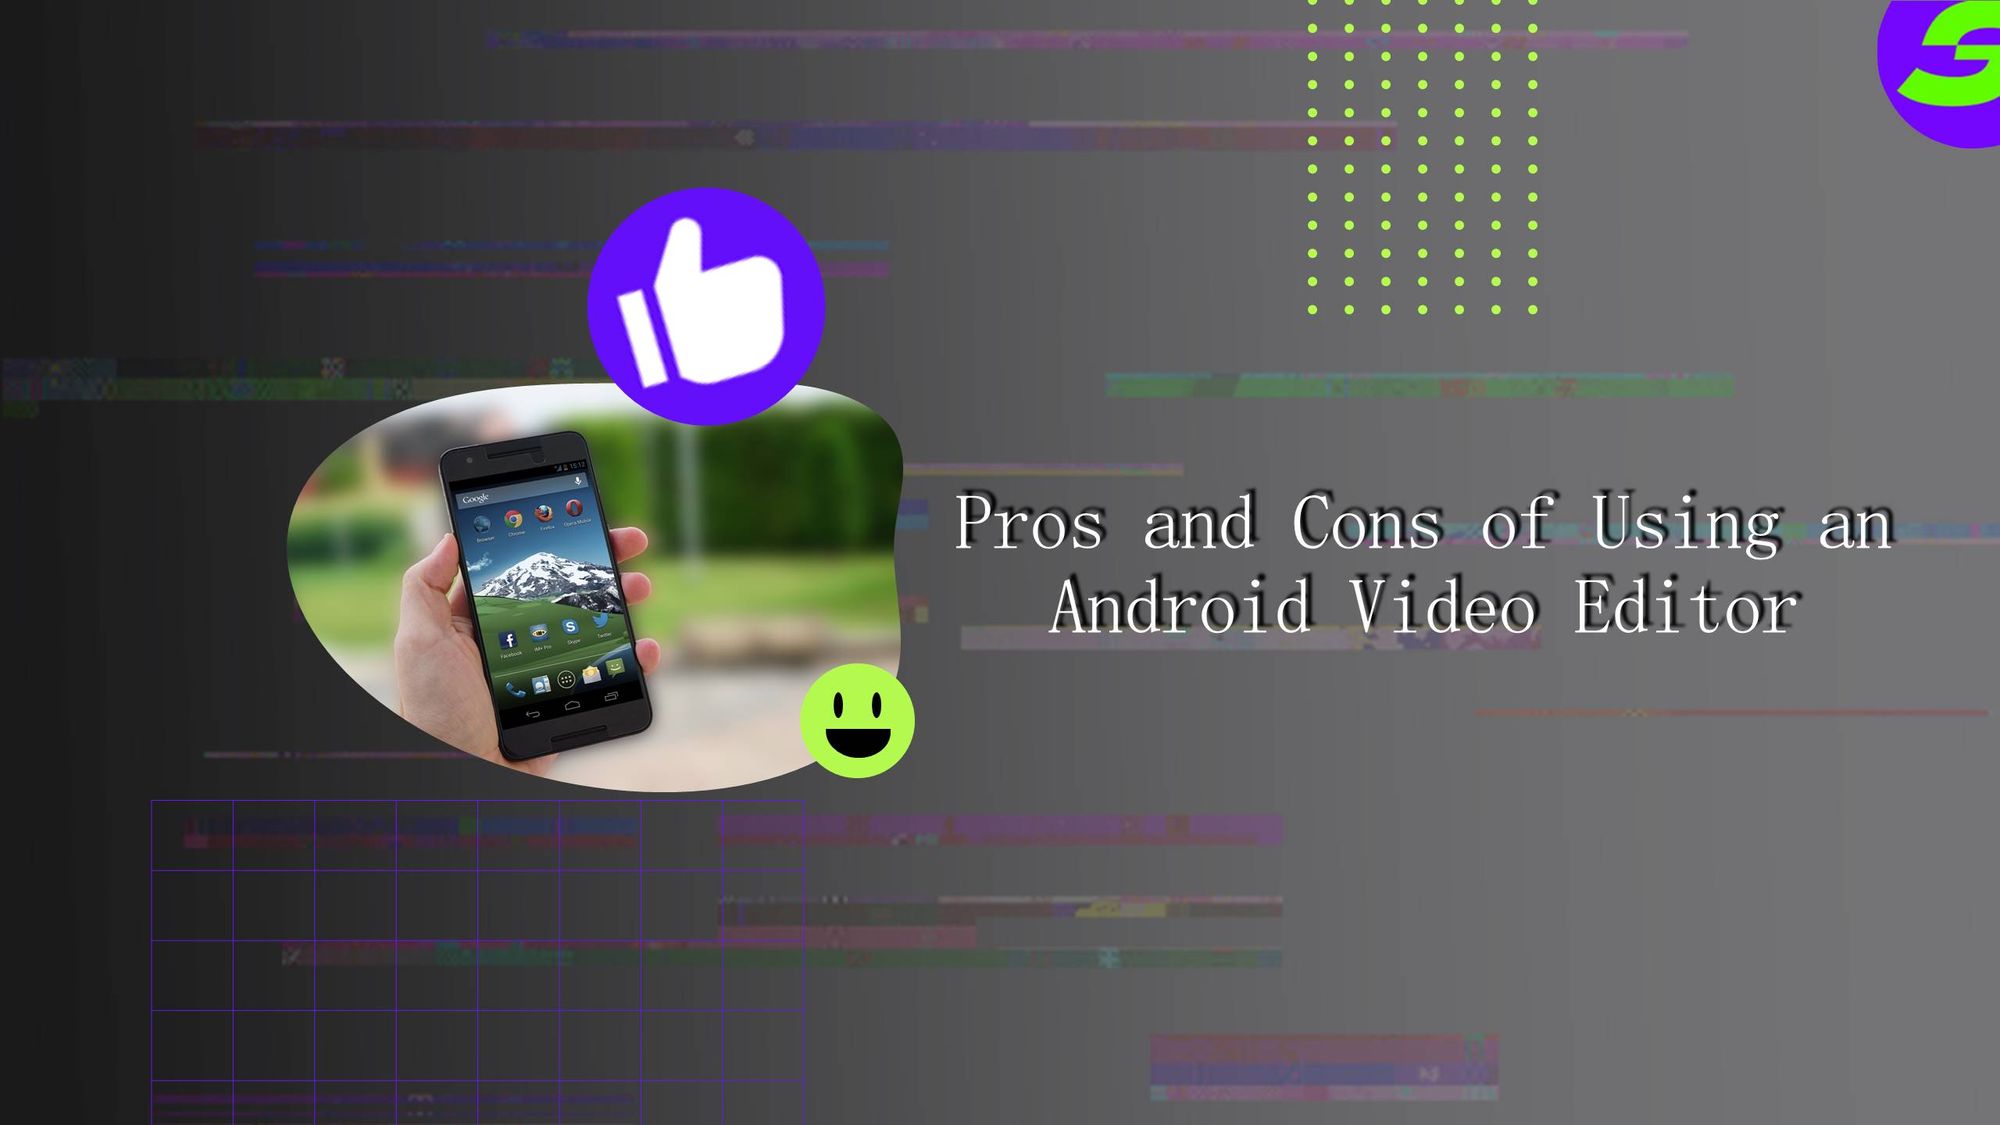 Pros and Cons of Using Android Video Editing app